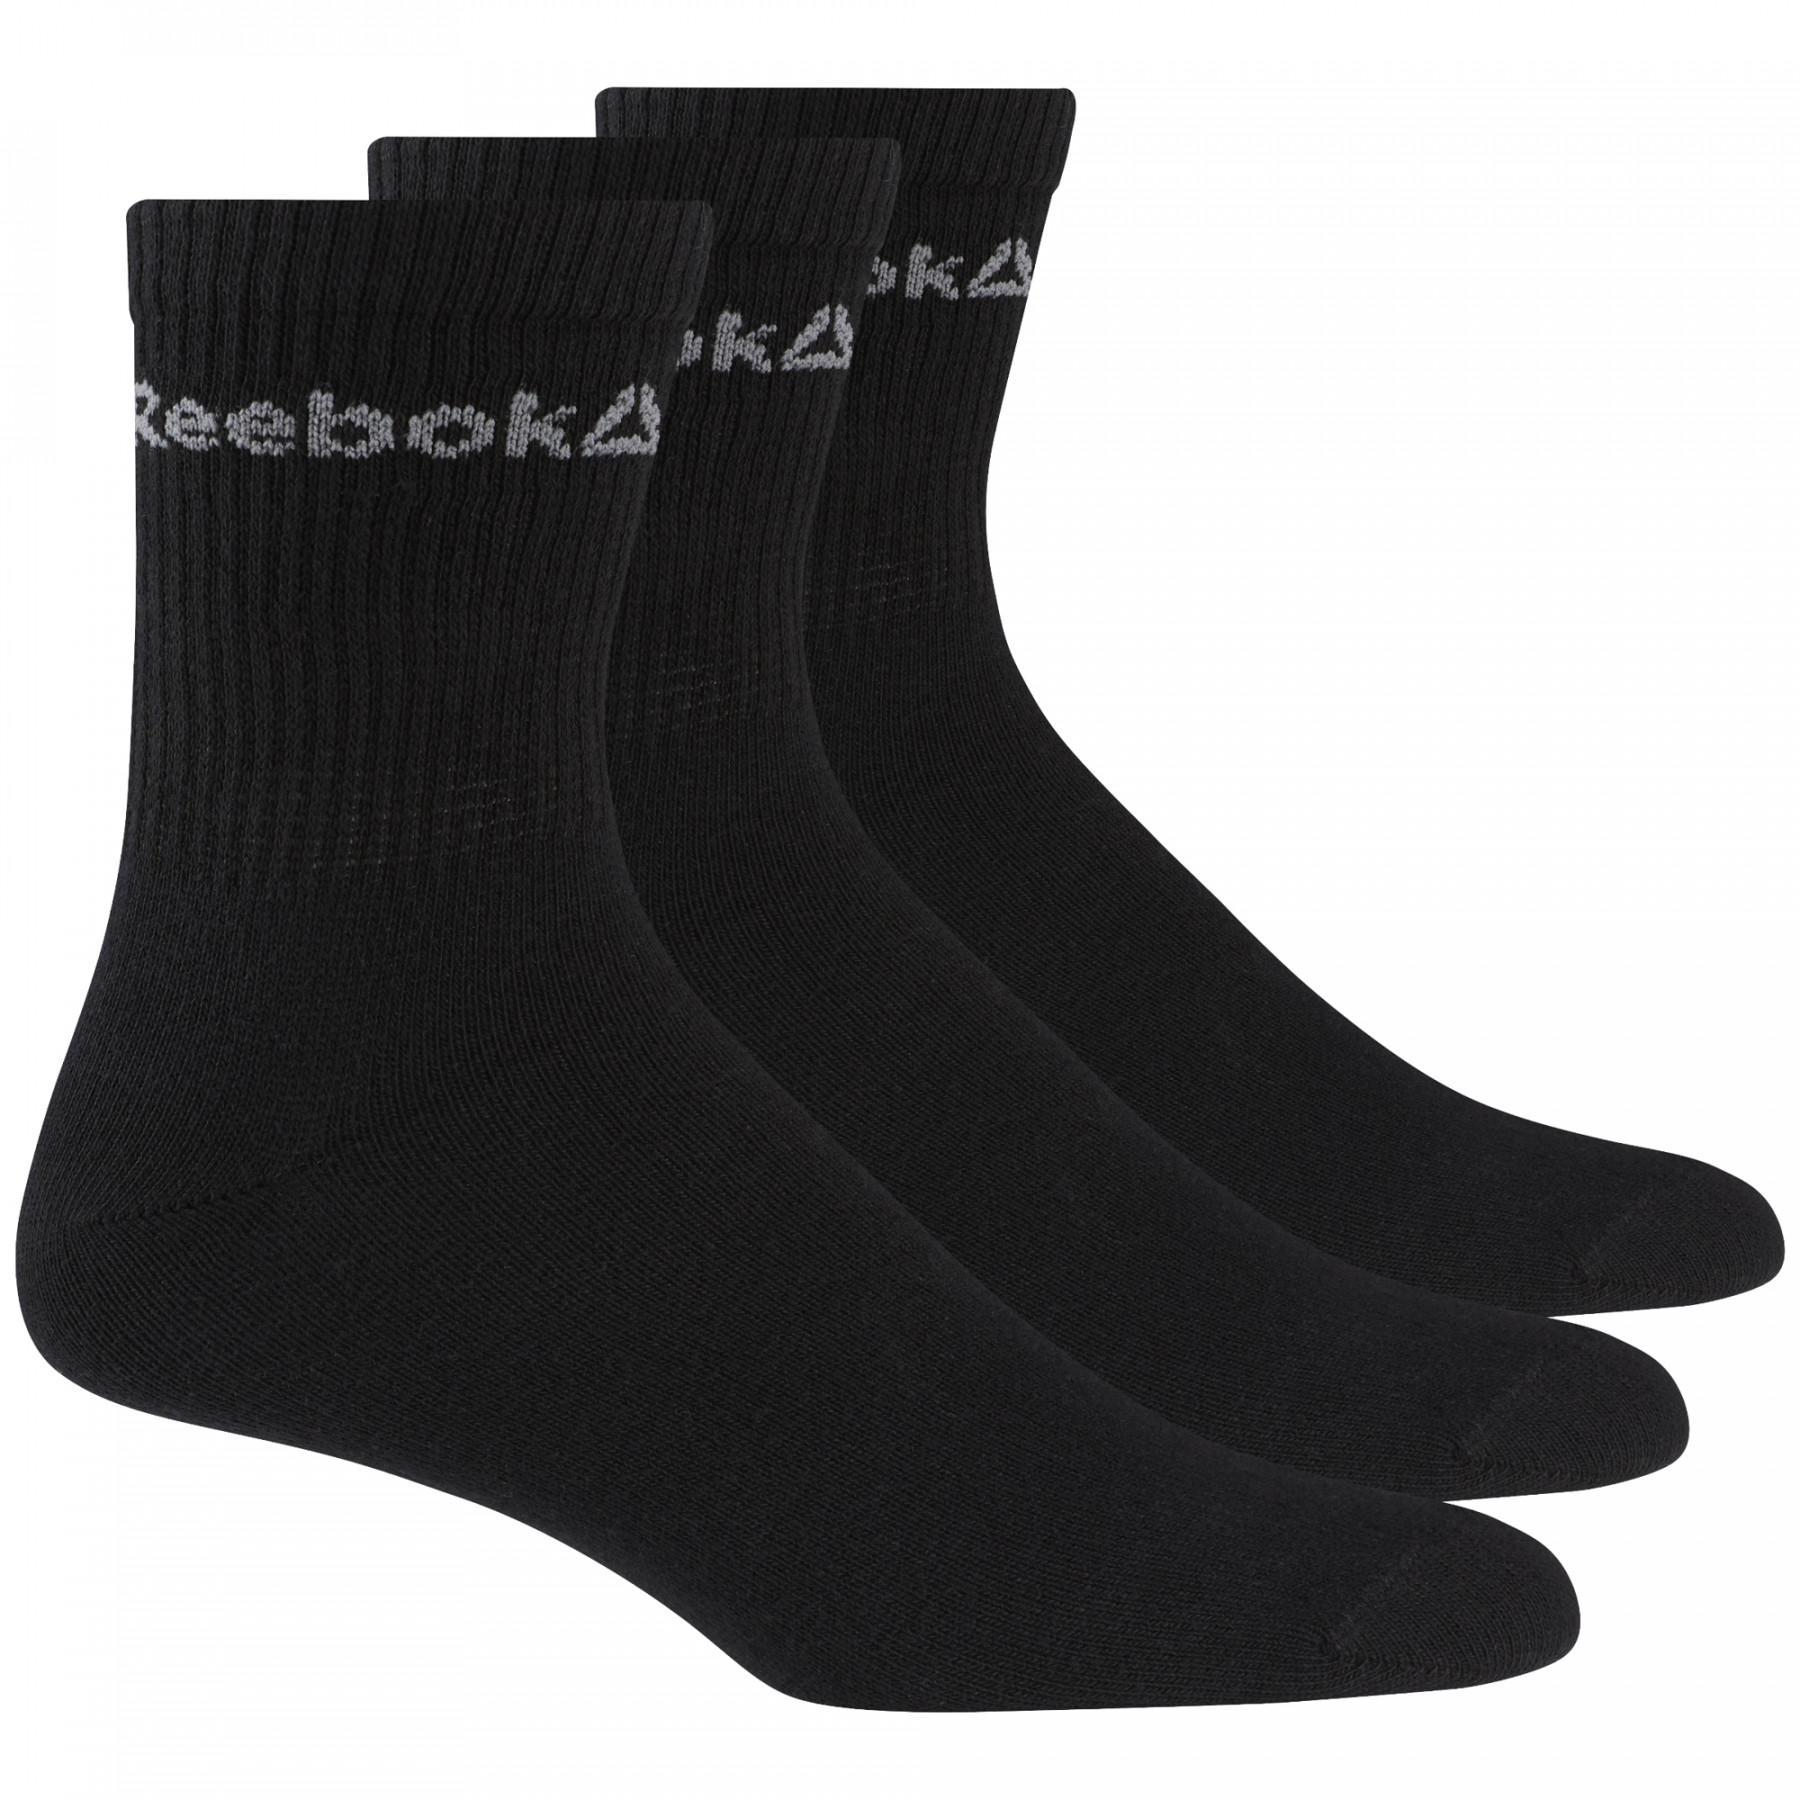 Pack of 3 pairs of mid-rise socks Reebok Active Core